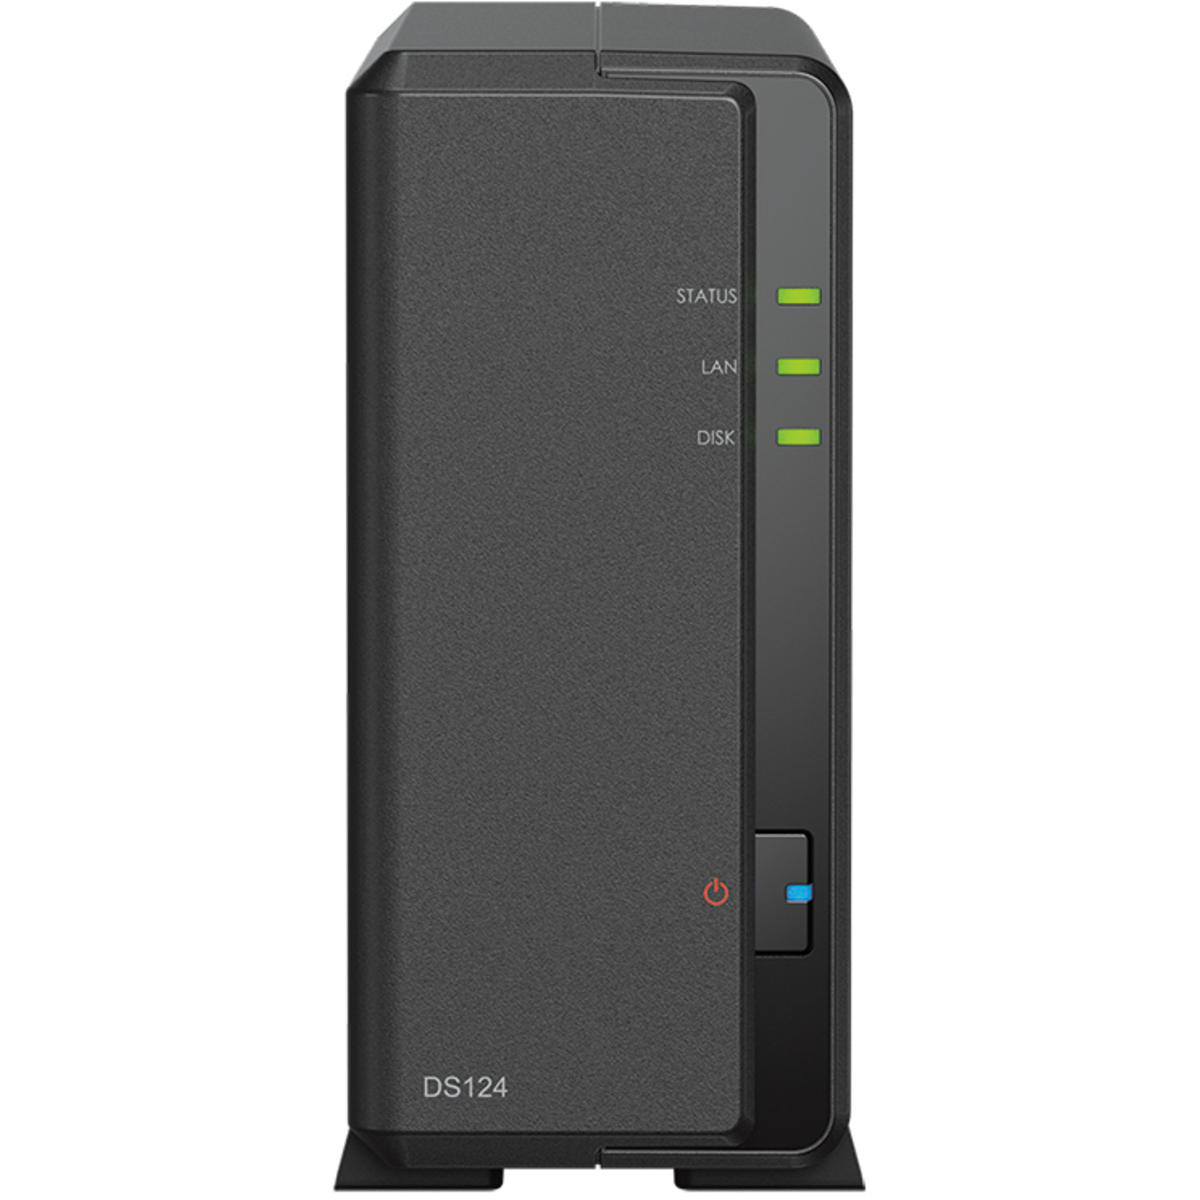 buy Synology DiskStation DS124 4tb Desktop NAS - Network Attached Storage Device 1x4000gb Toshiba MN Series MN08ADA400E 3.5 7200rpm SATA 6Gb/s HDD NAS Class Drives Installed - Burn-In Tested - ON SALE - nas headquarters buy network attached storage server device das new raid-5 free shipping simply usa DiskStation DS124